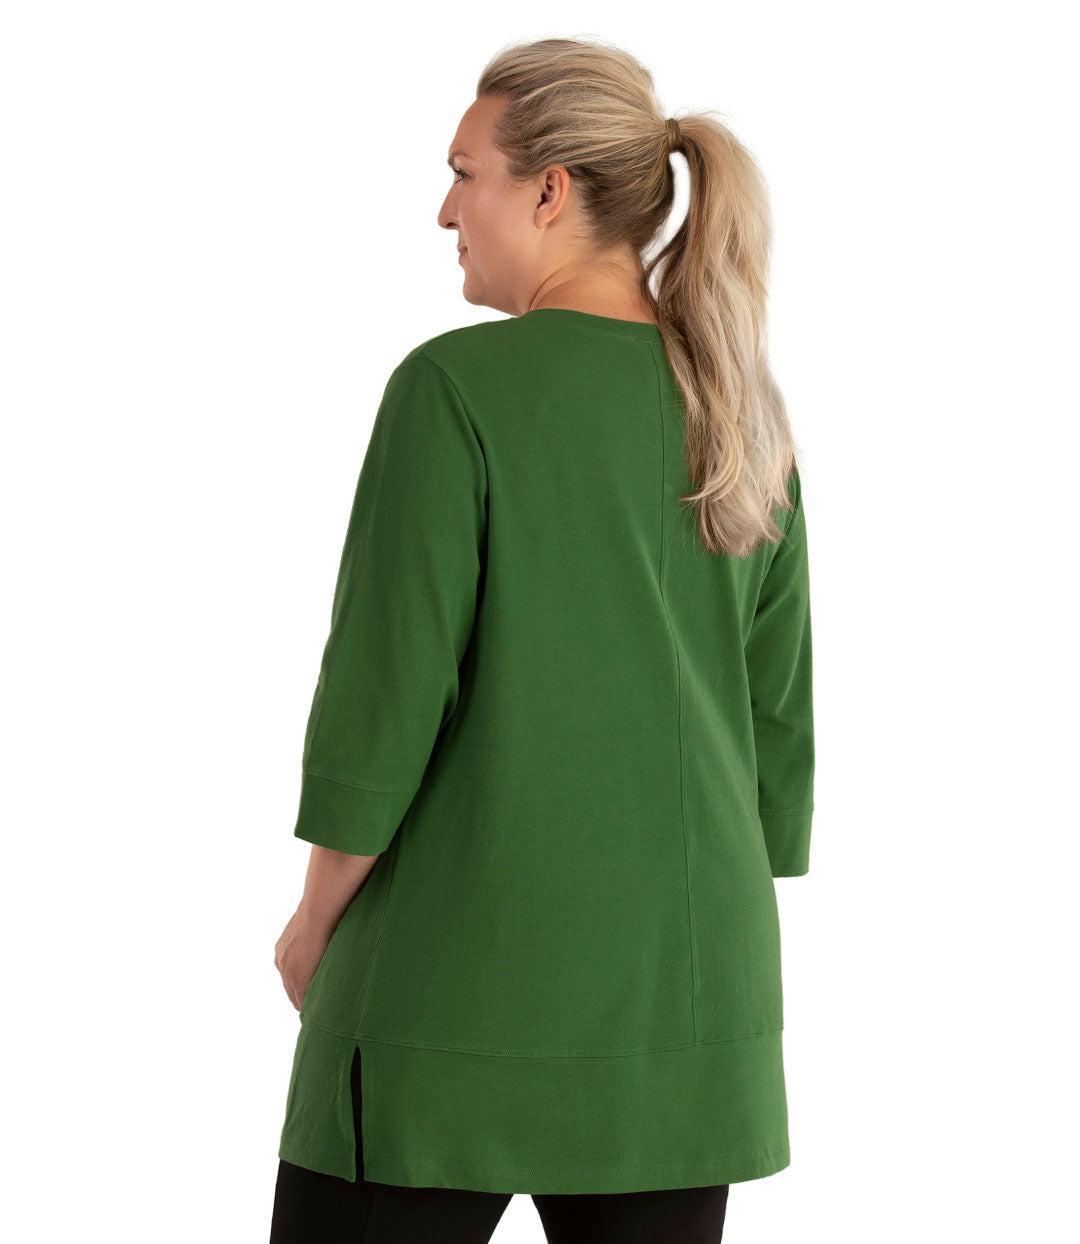 Plus size woman, facing back looking left, wearing JunoActive plus size Stretch Naturals Princess V-neck Tunic in the color Evergreen. She is wearing JunoActive Plus Size Leggings in the color Black.